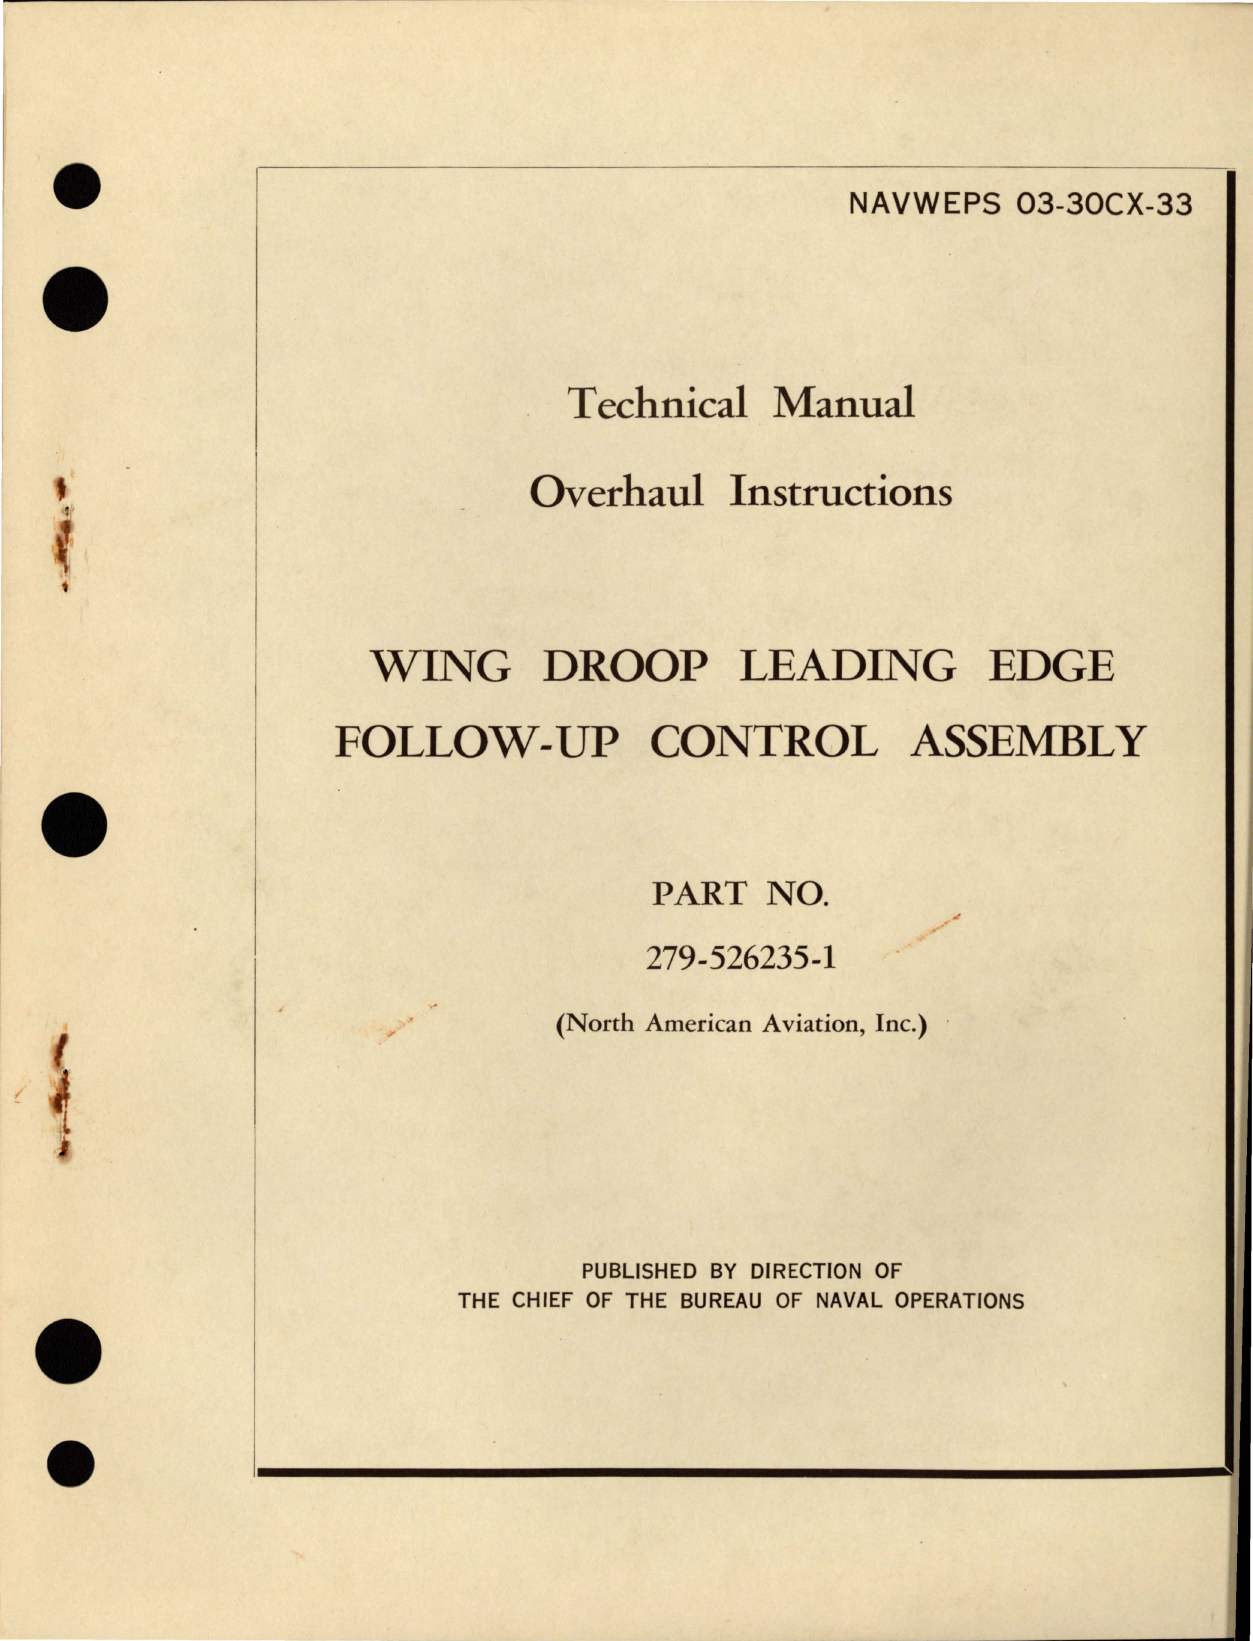 Sample page 1 from AirCorps Library document: Overhaul Instructions for Wing Droop Leading Edge Follow Up Control Assembly - Part 279-526235-1 